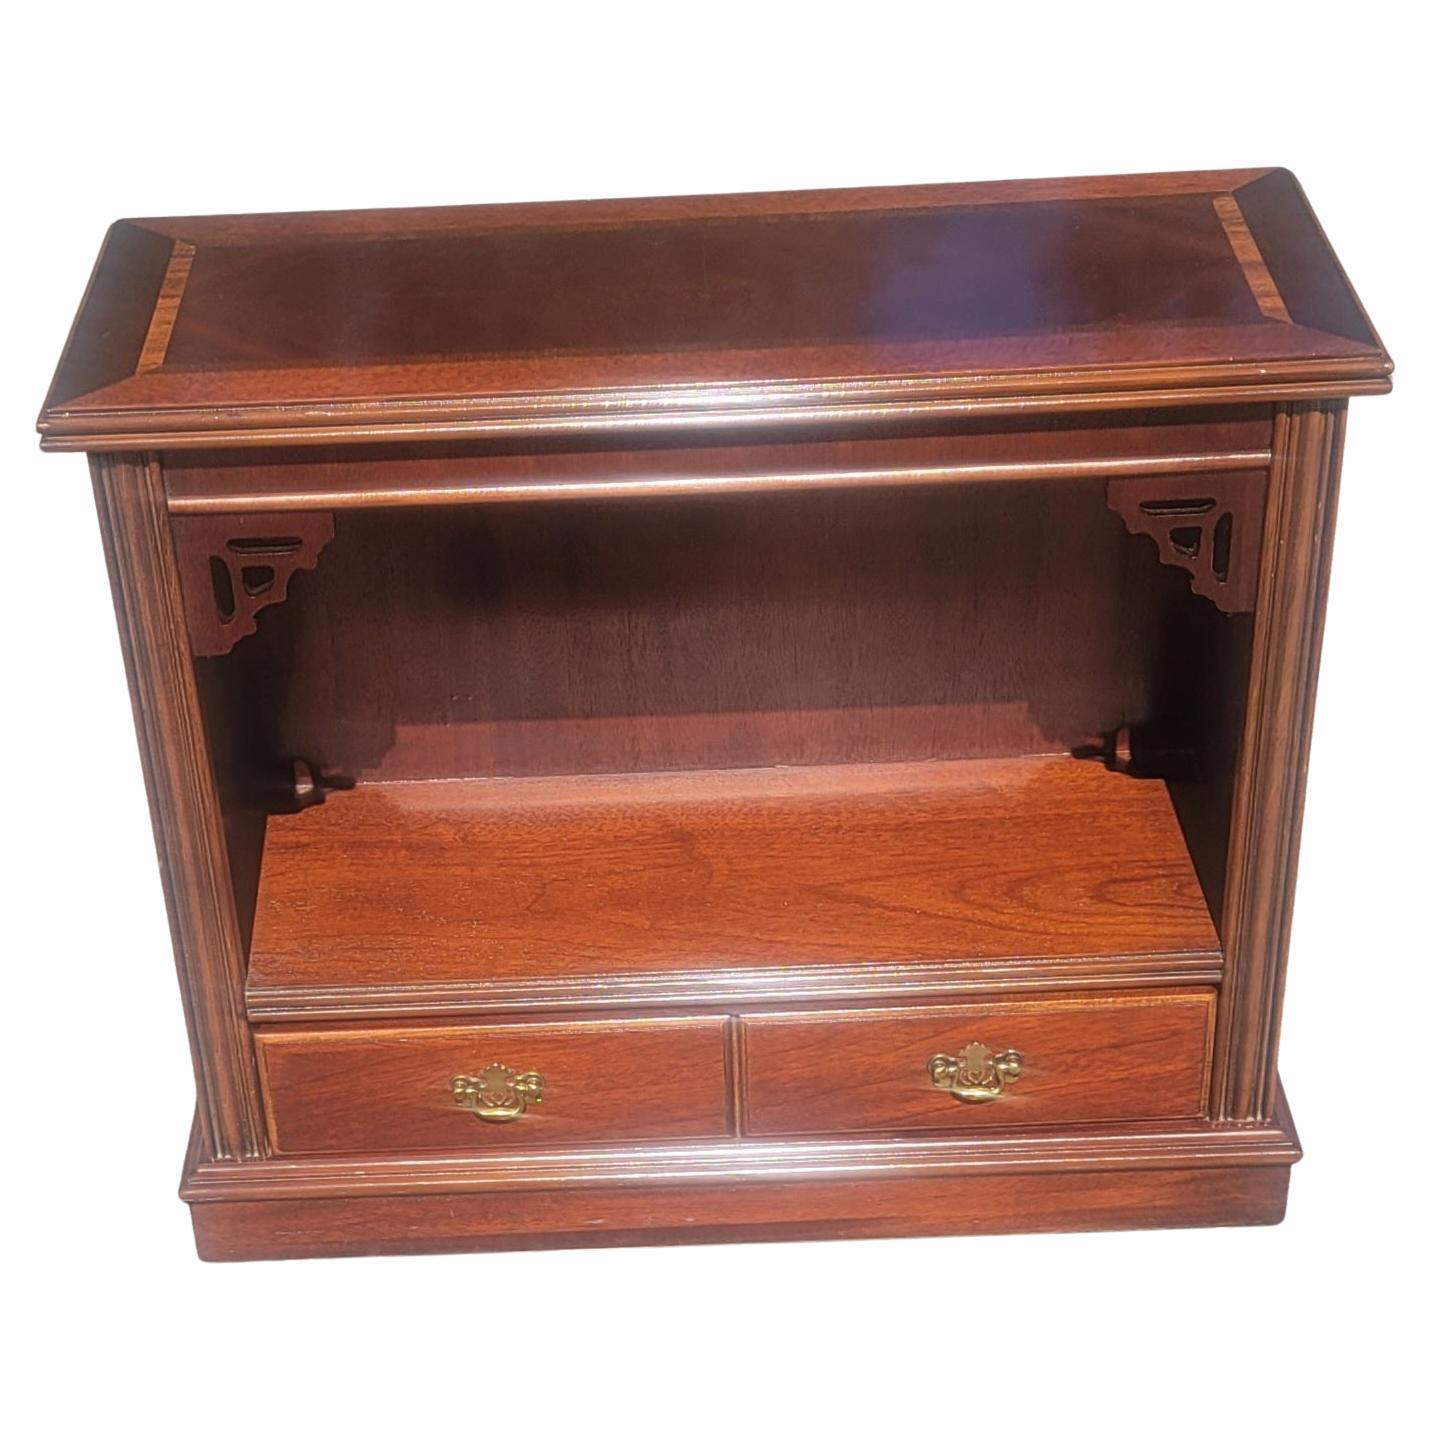 A versatile lane Altavista Chippendale banded top mahogany low bookcase or console table of hall table in very good vintage condition. Use in your office, home office or hall way as a console table. Measures 37